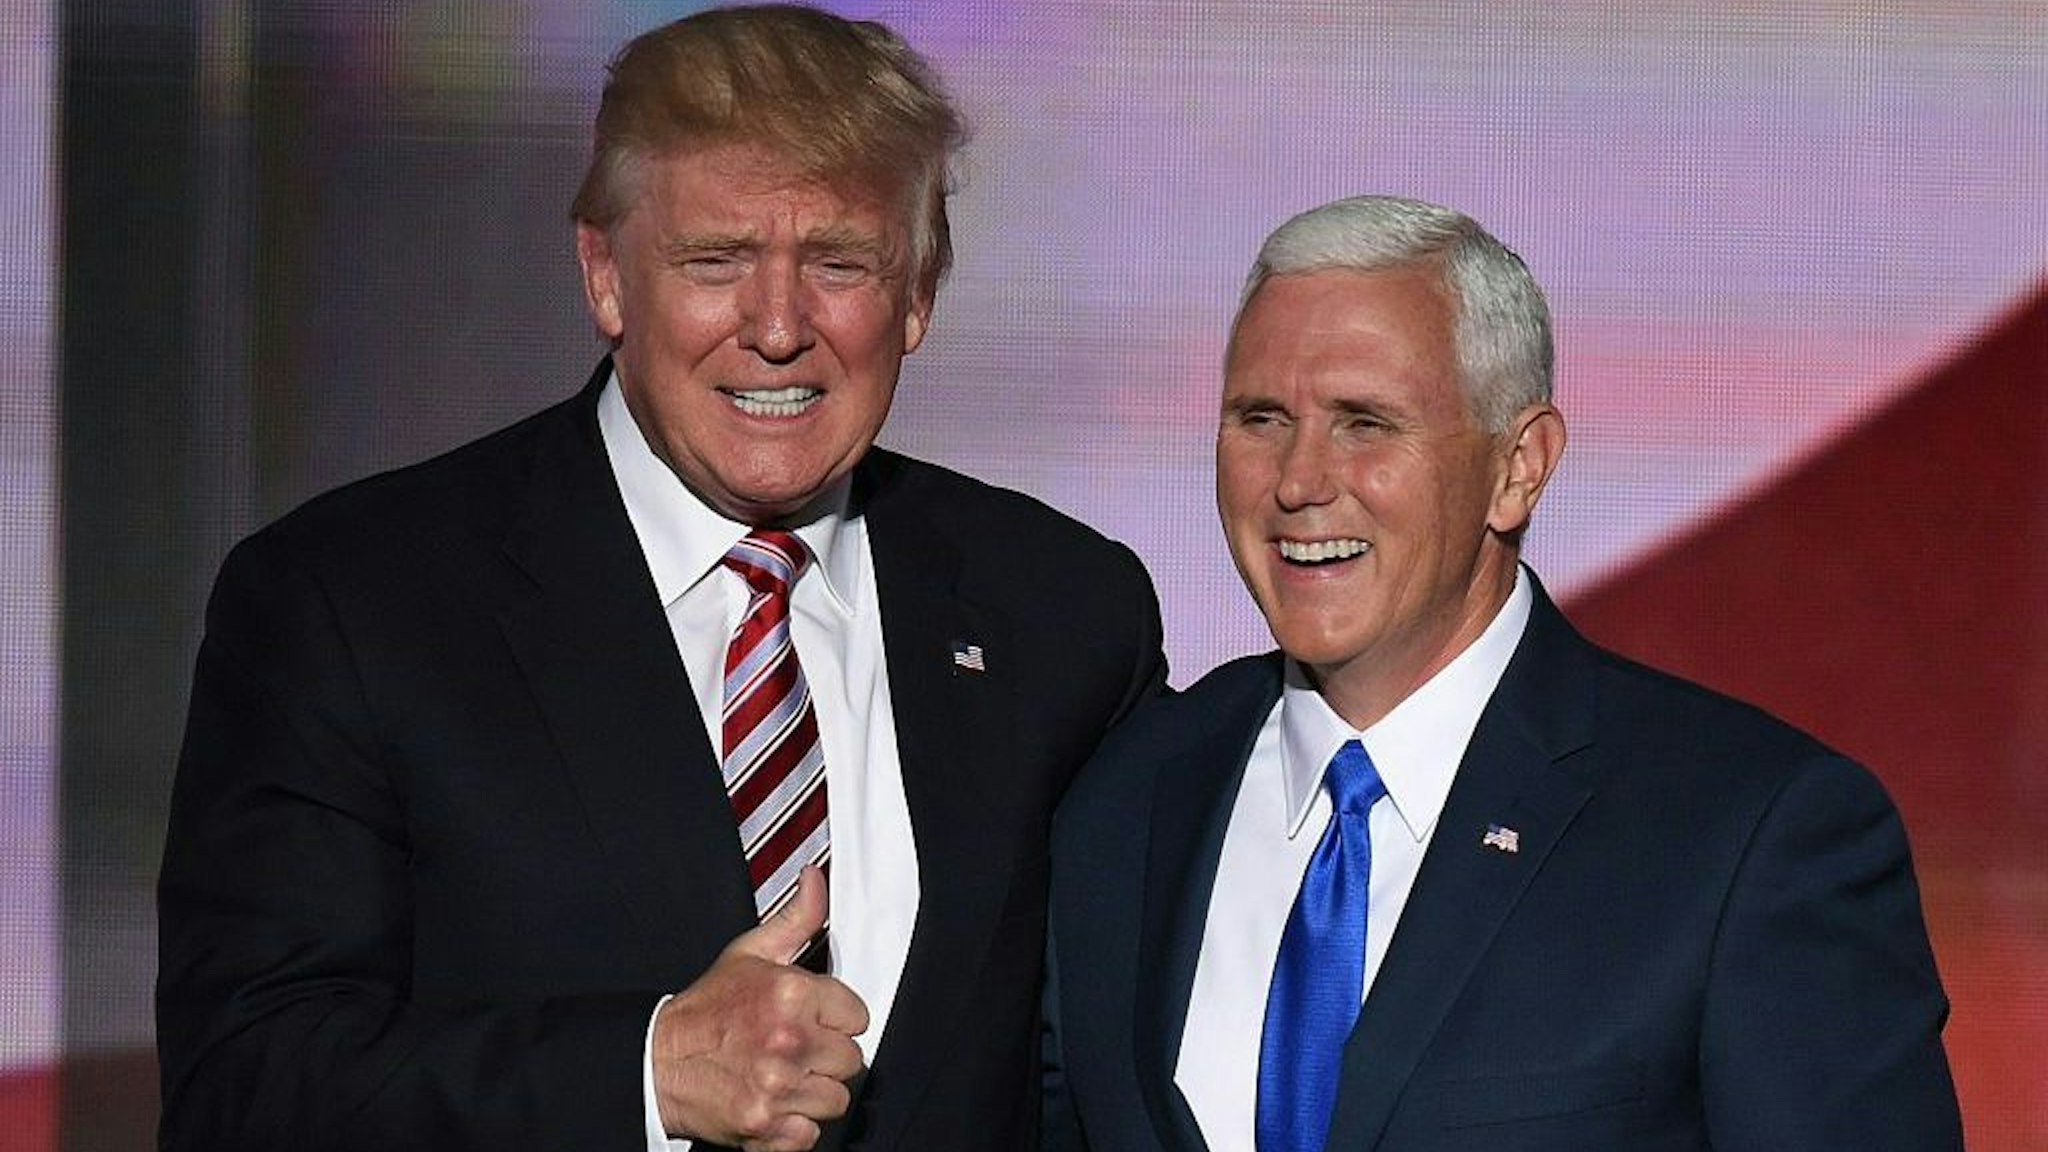 Republican presidential candidate Donald Trump (L)gives the thumbs-up as he stands with vice presidential candidate Mike Pence at the end of the third day of the Republican National Convention at the Quicken Loans Arena in Cleveland, Ohio on July 20, 2016. (Photo credit should read TIMOTHY A. CLARY/AFP via Getty Images)